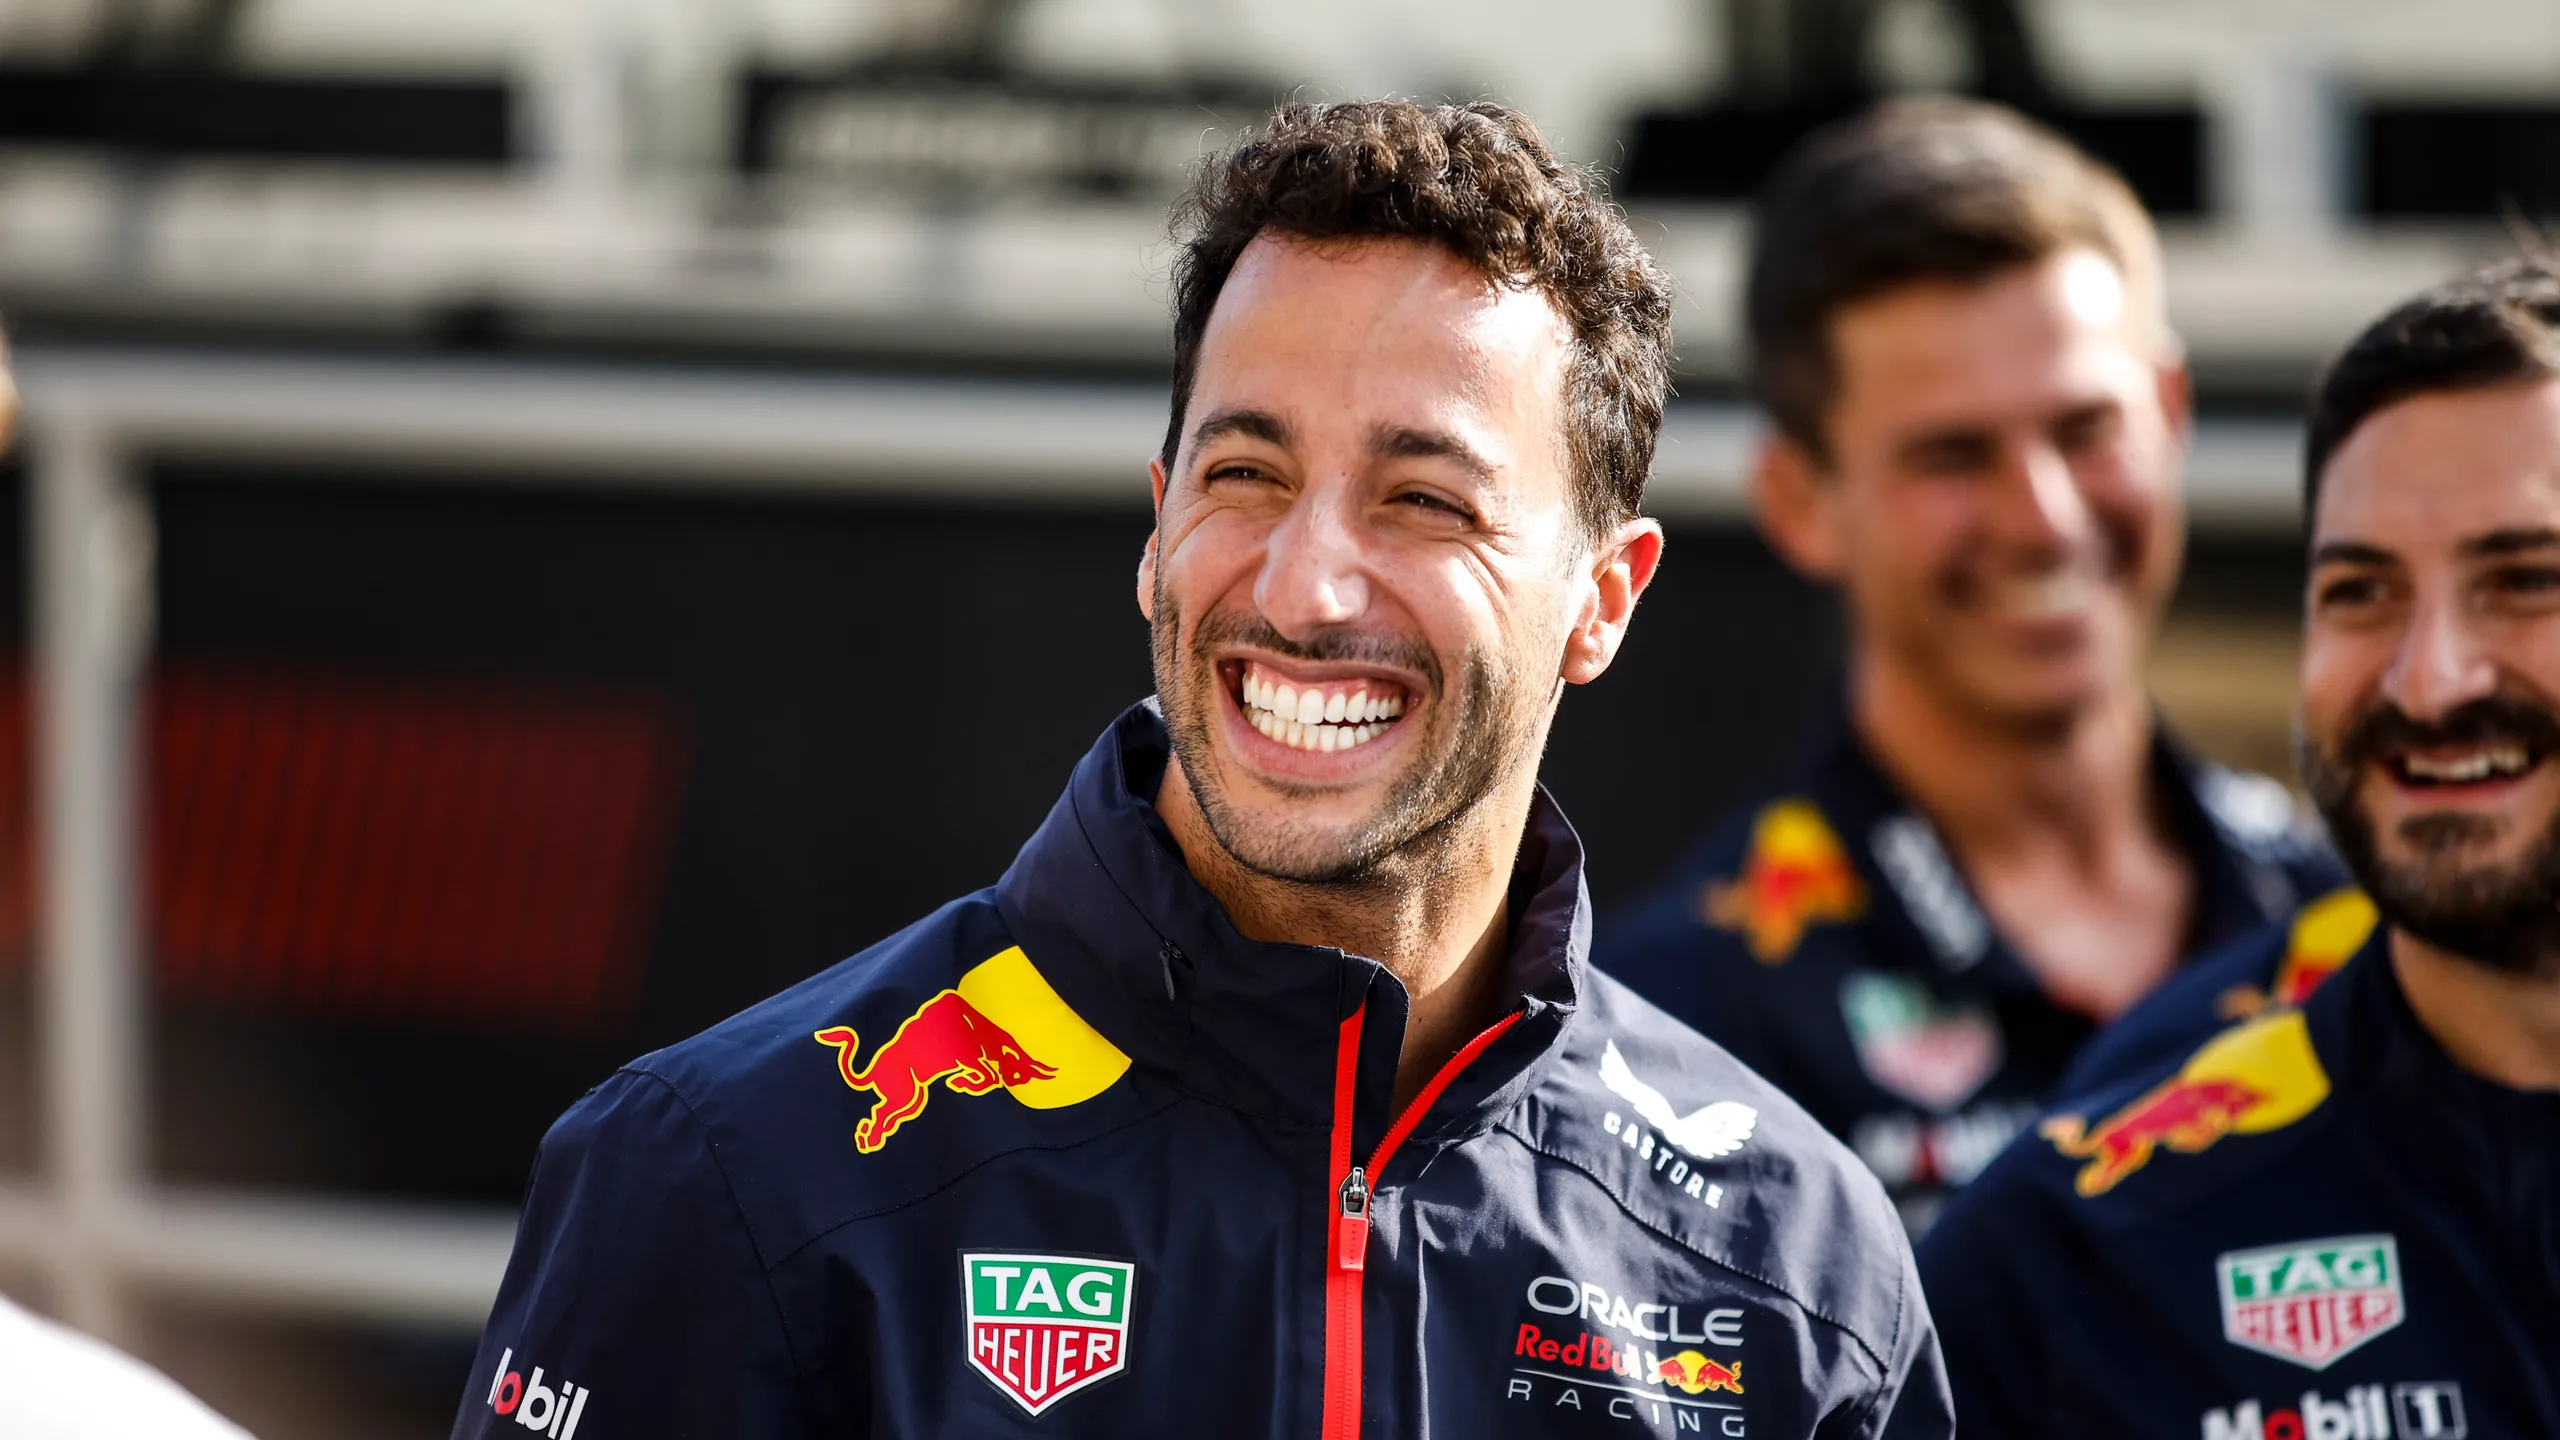 Ricciardo Hits Back at Villeneuve's Criticism with Strong Words